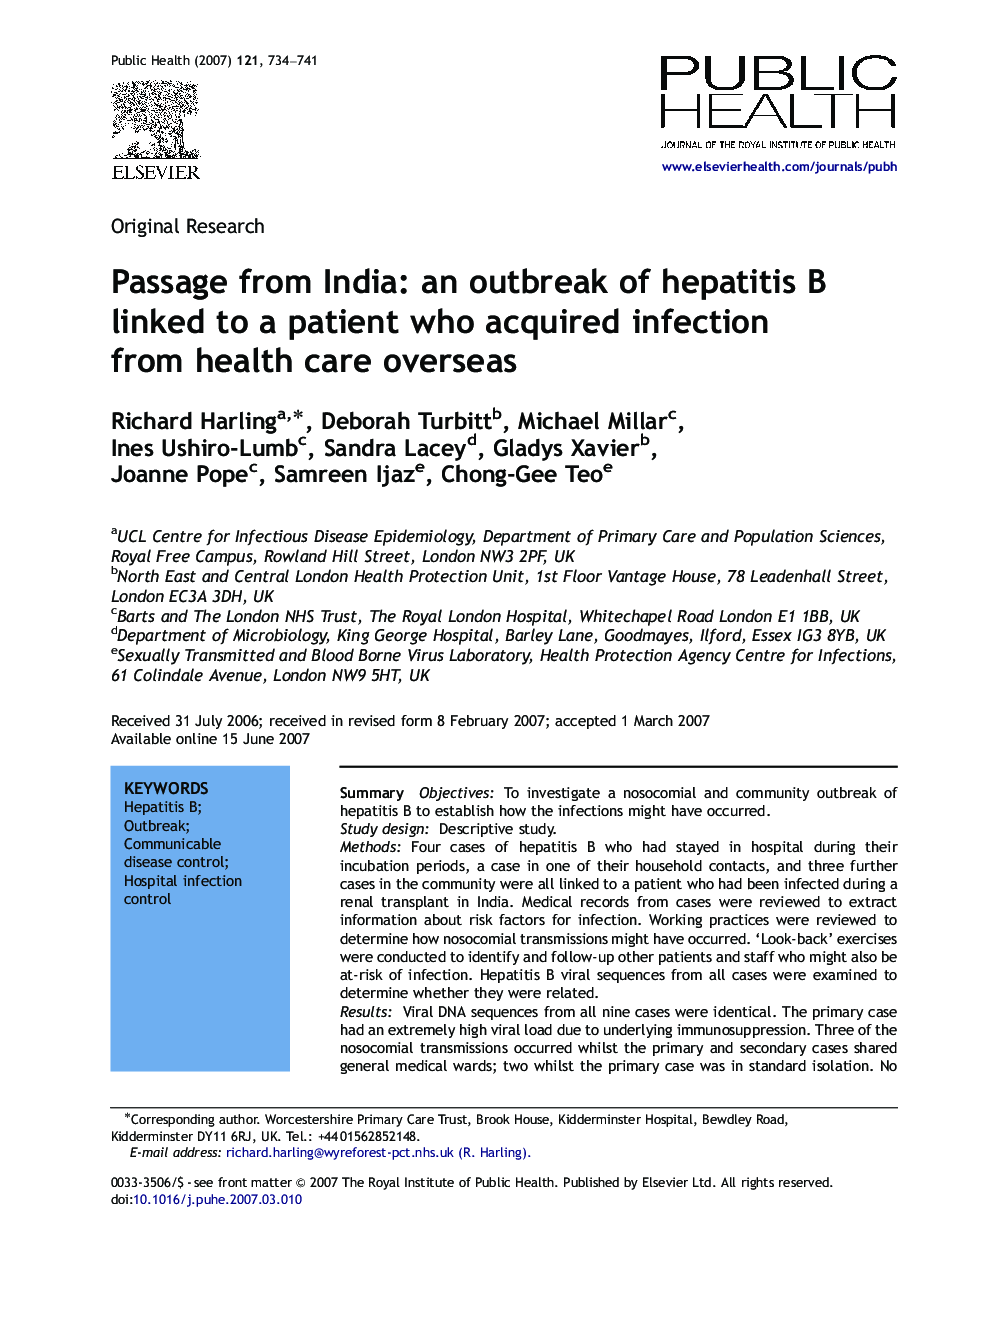 Passage from India: an outbreak of hepatitis B linked to a patient who acquired infection from health care overseas